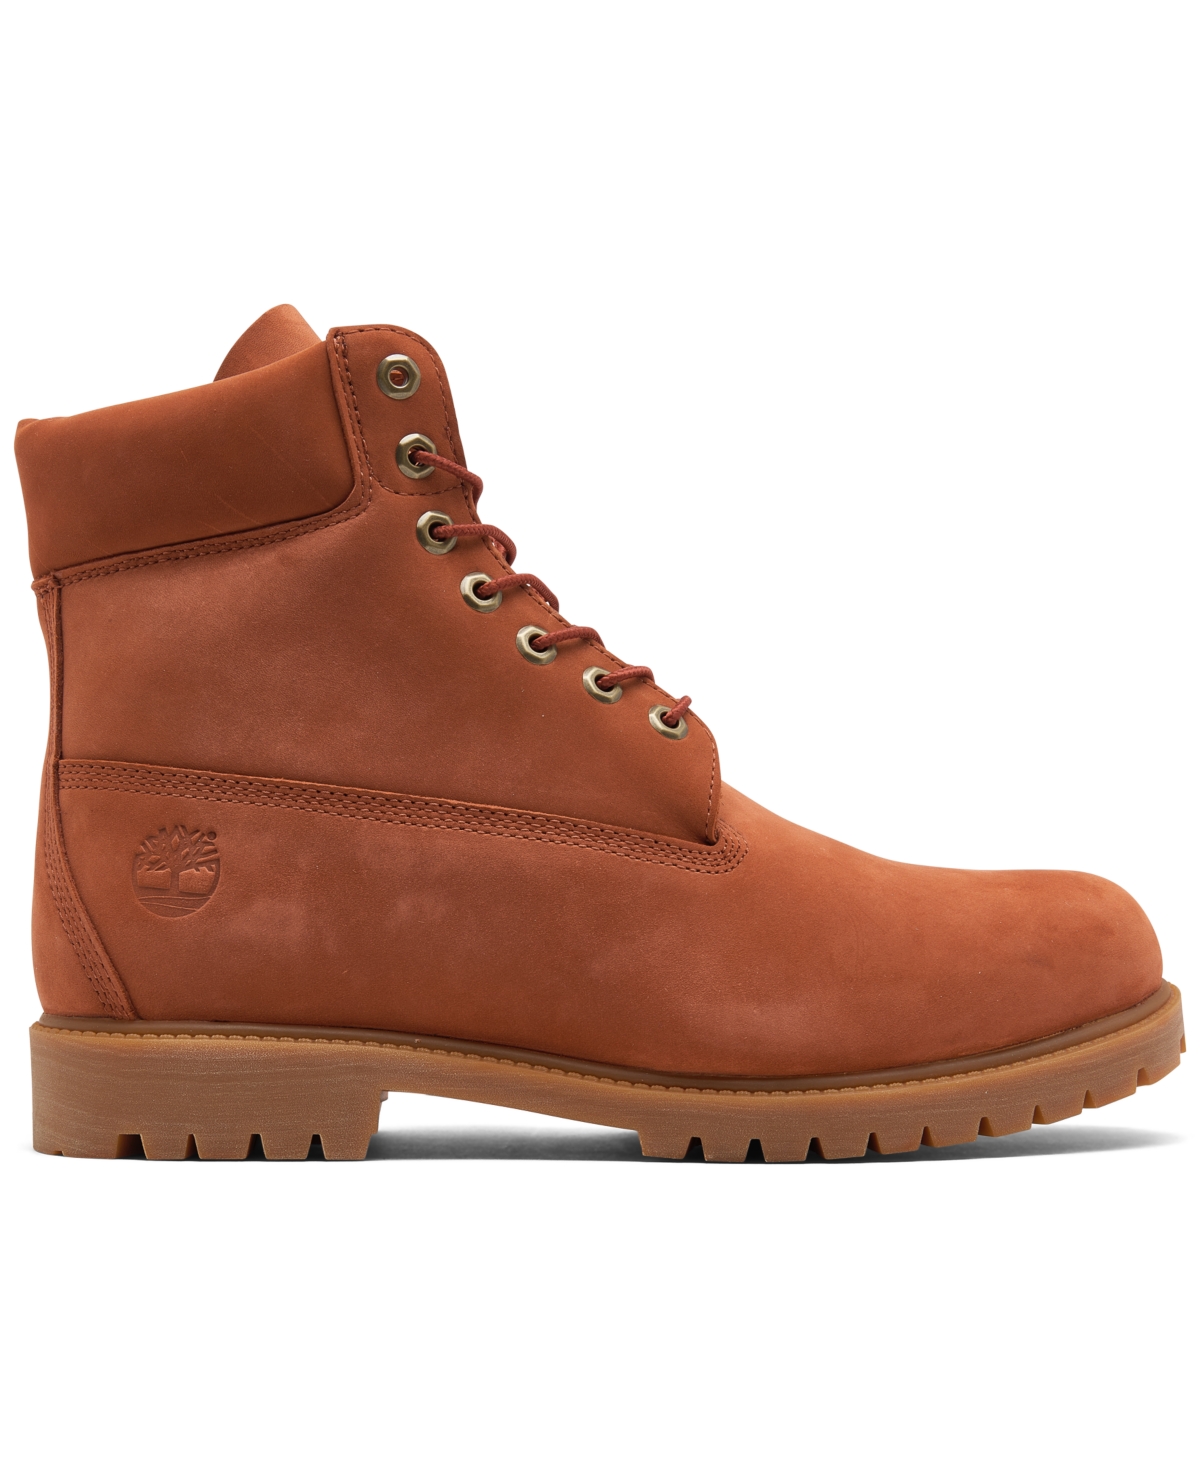 Shop Timberland Men's 6" Premium Water Resistant Lace-up Boots From Finish Line In Dark Rust